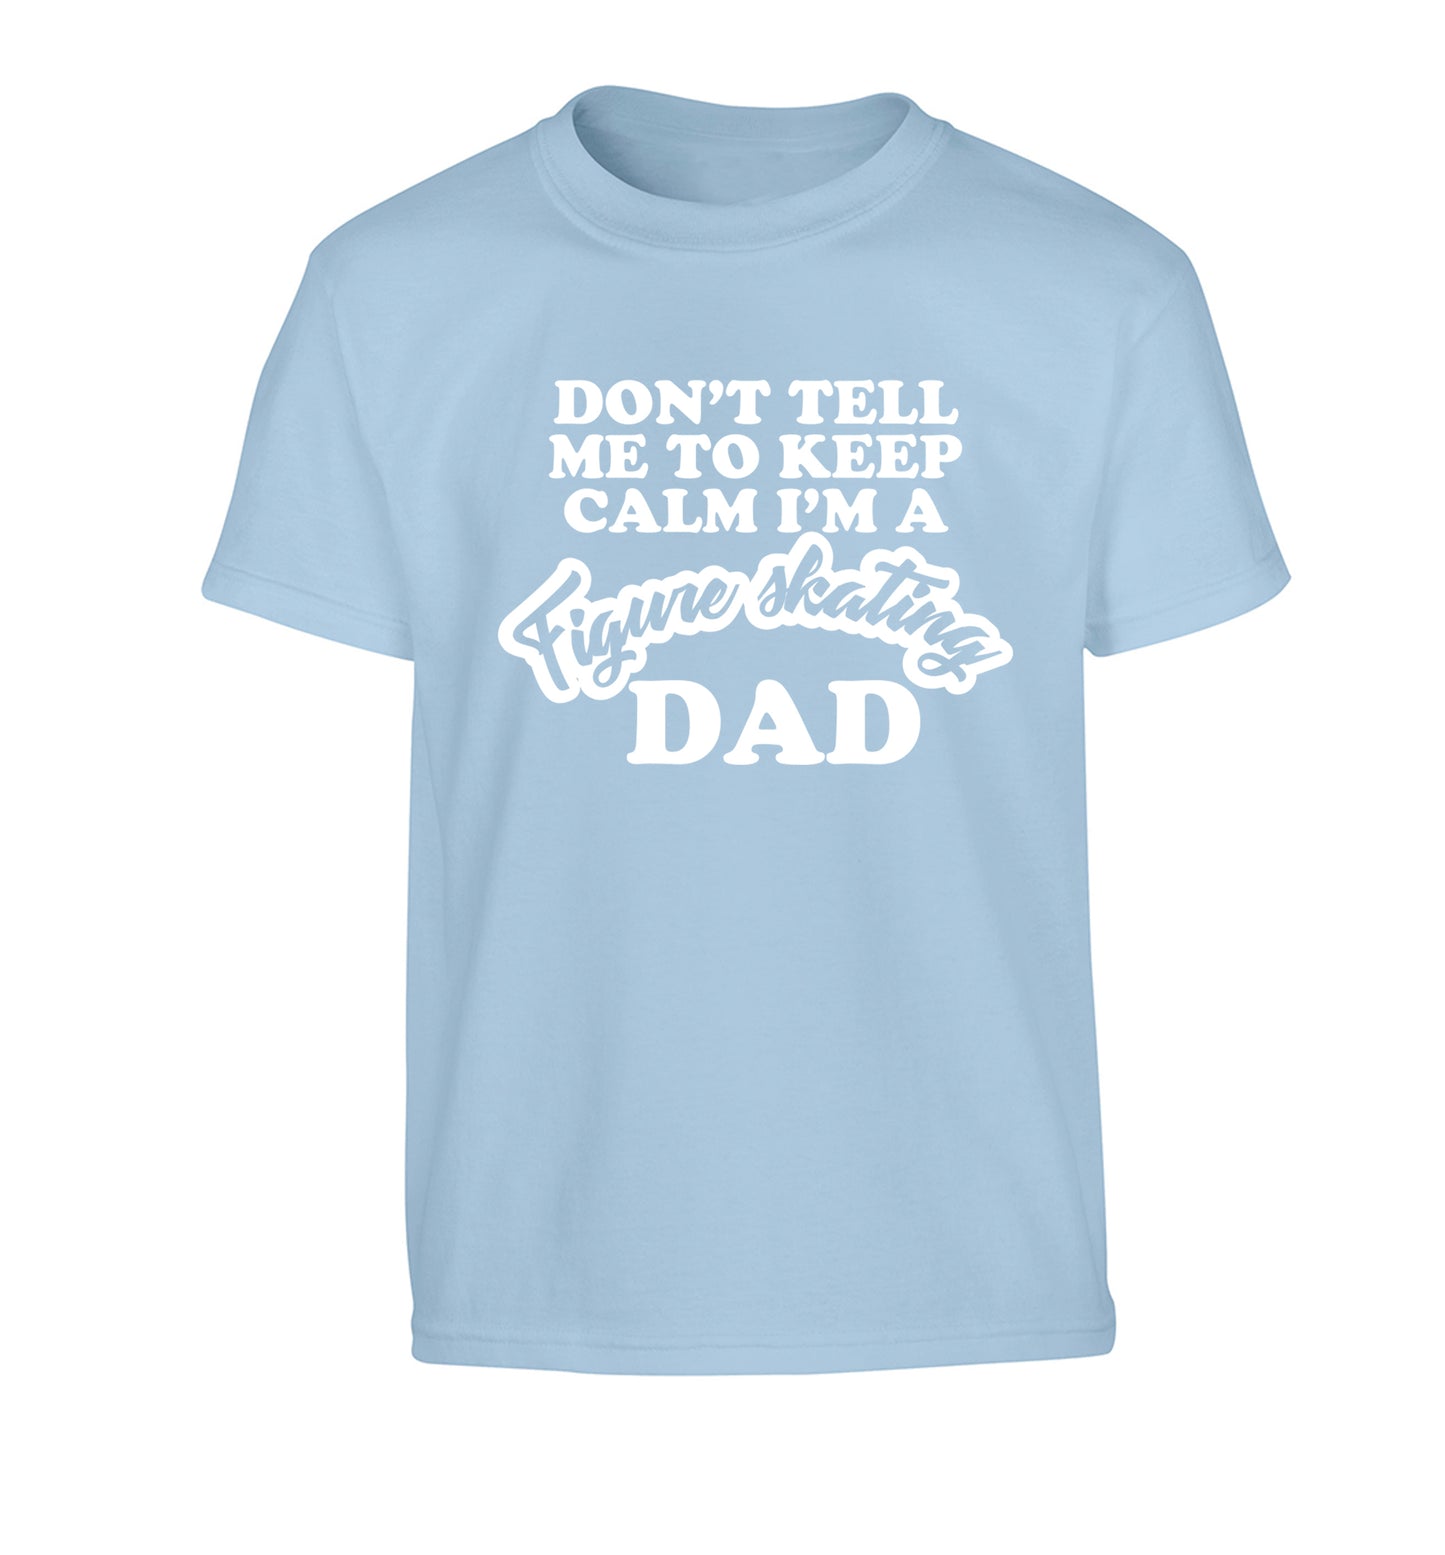 Don't tell me to keep calm I'm a figure skating dad Children's light blue Tshirt 12-14 Years